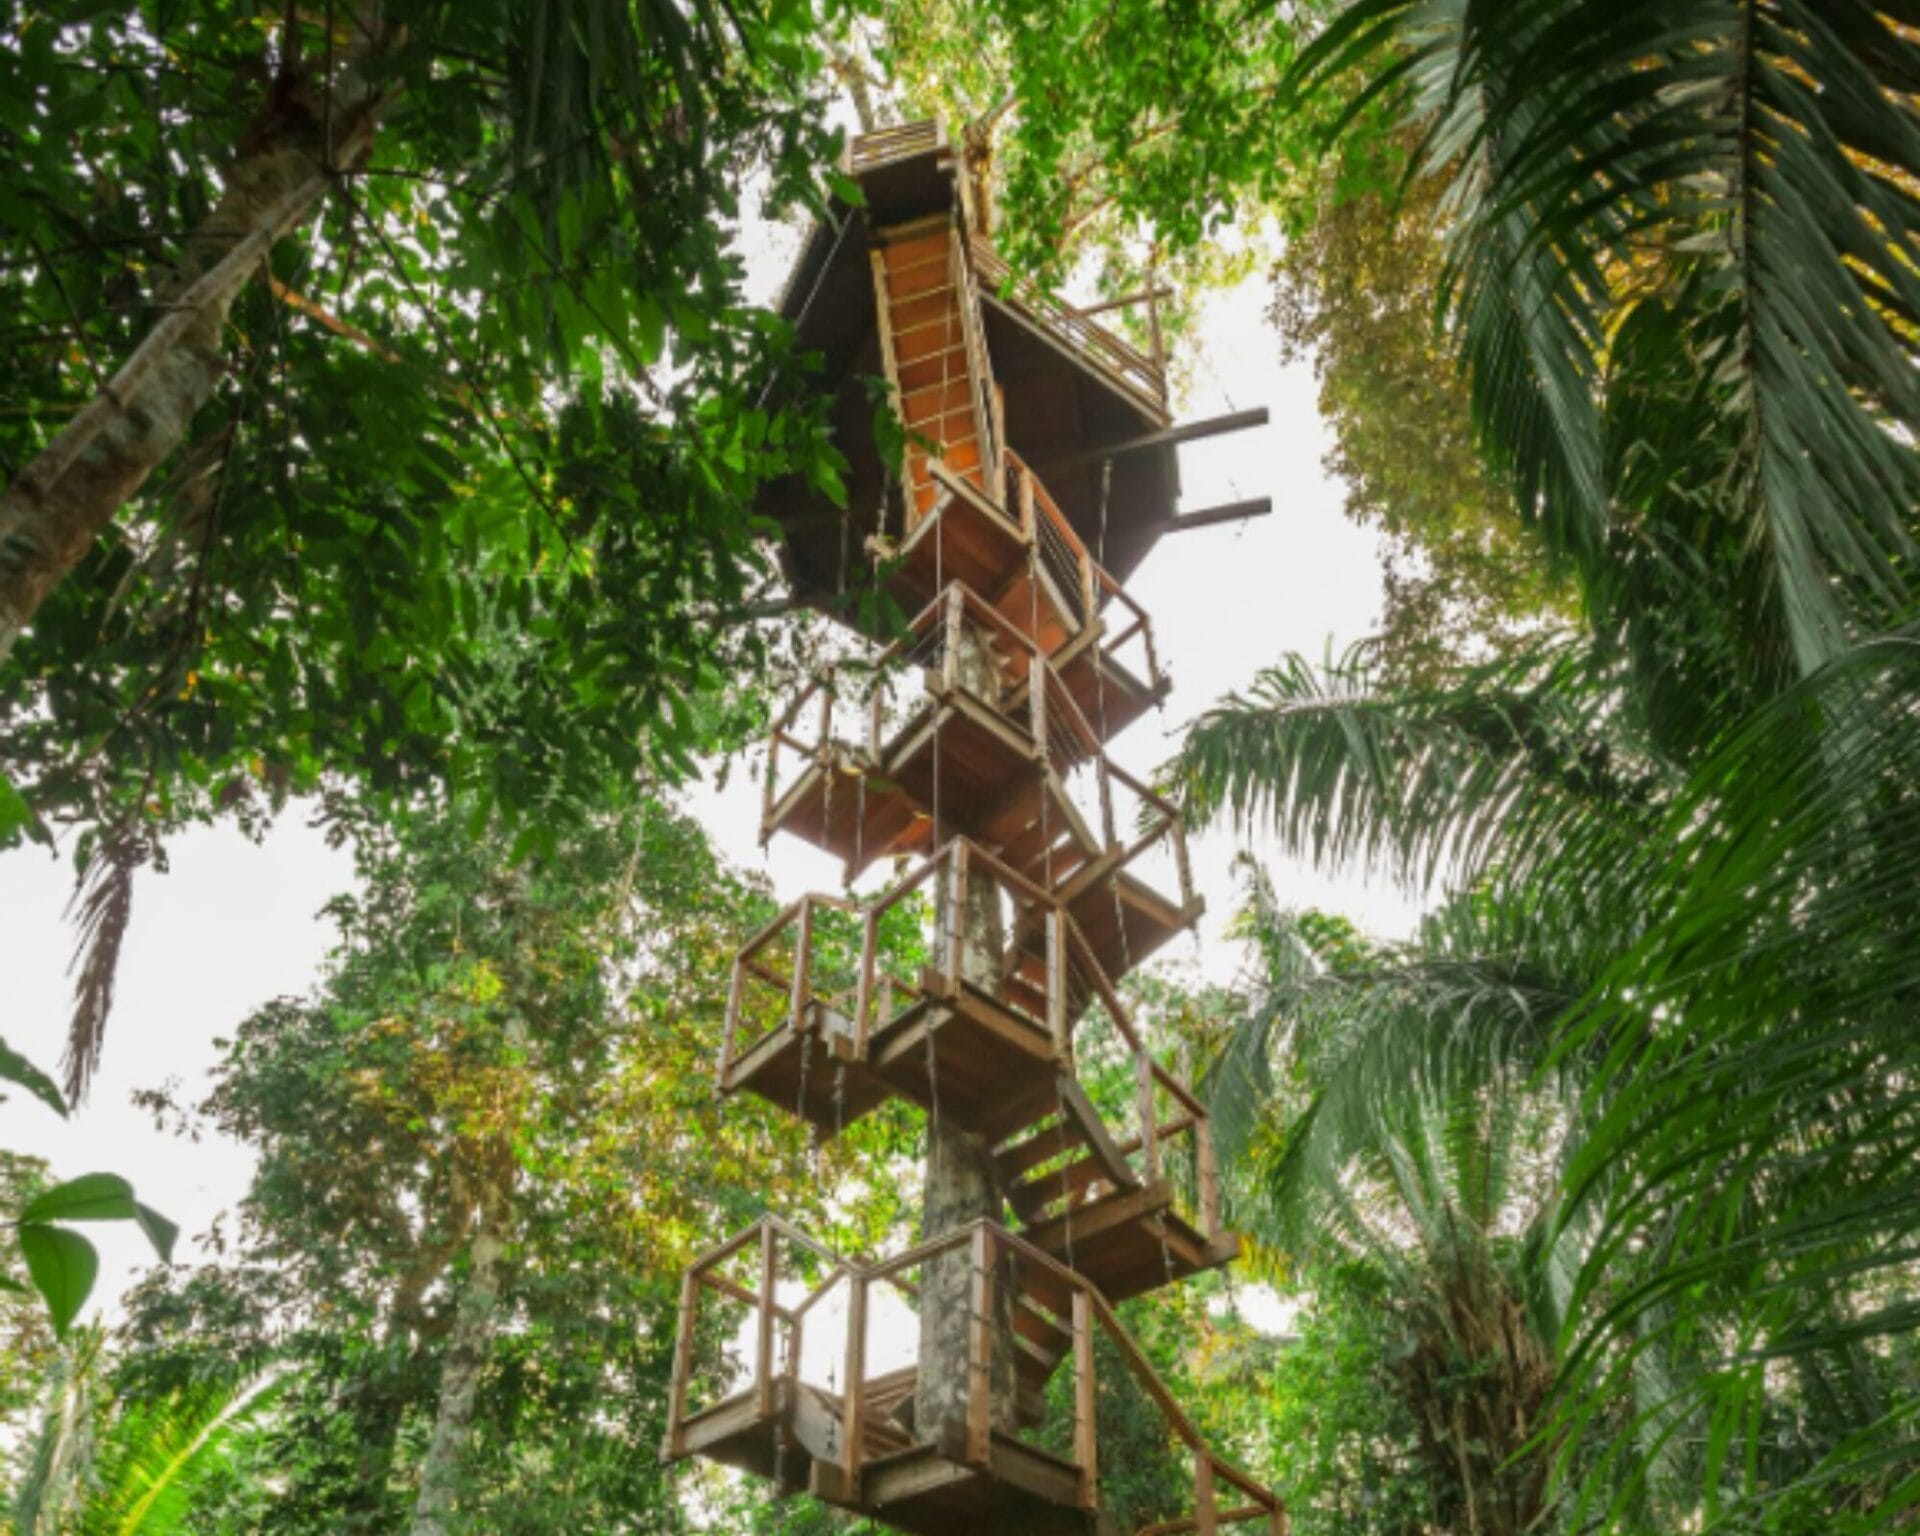 Treehouse stairs